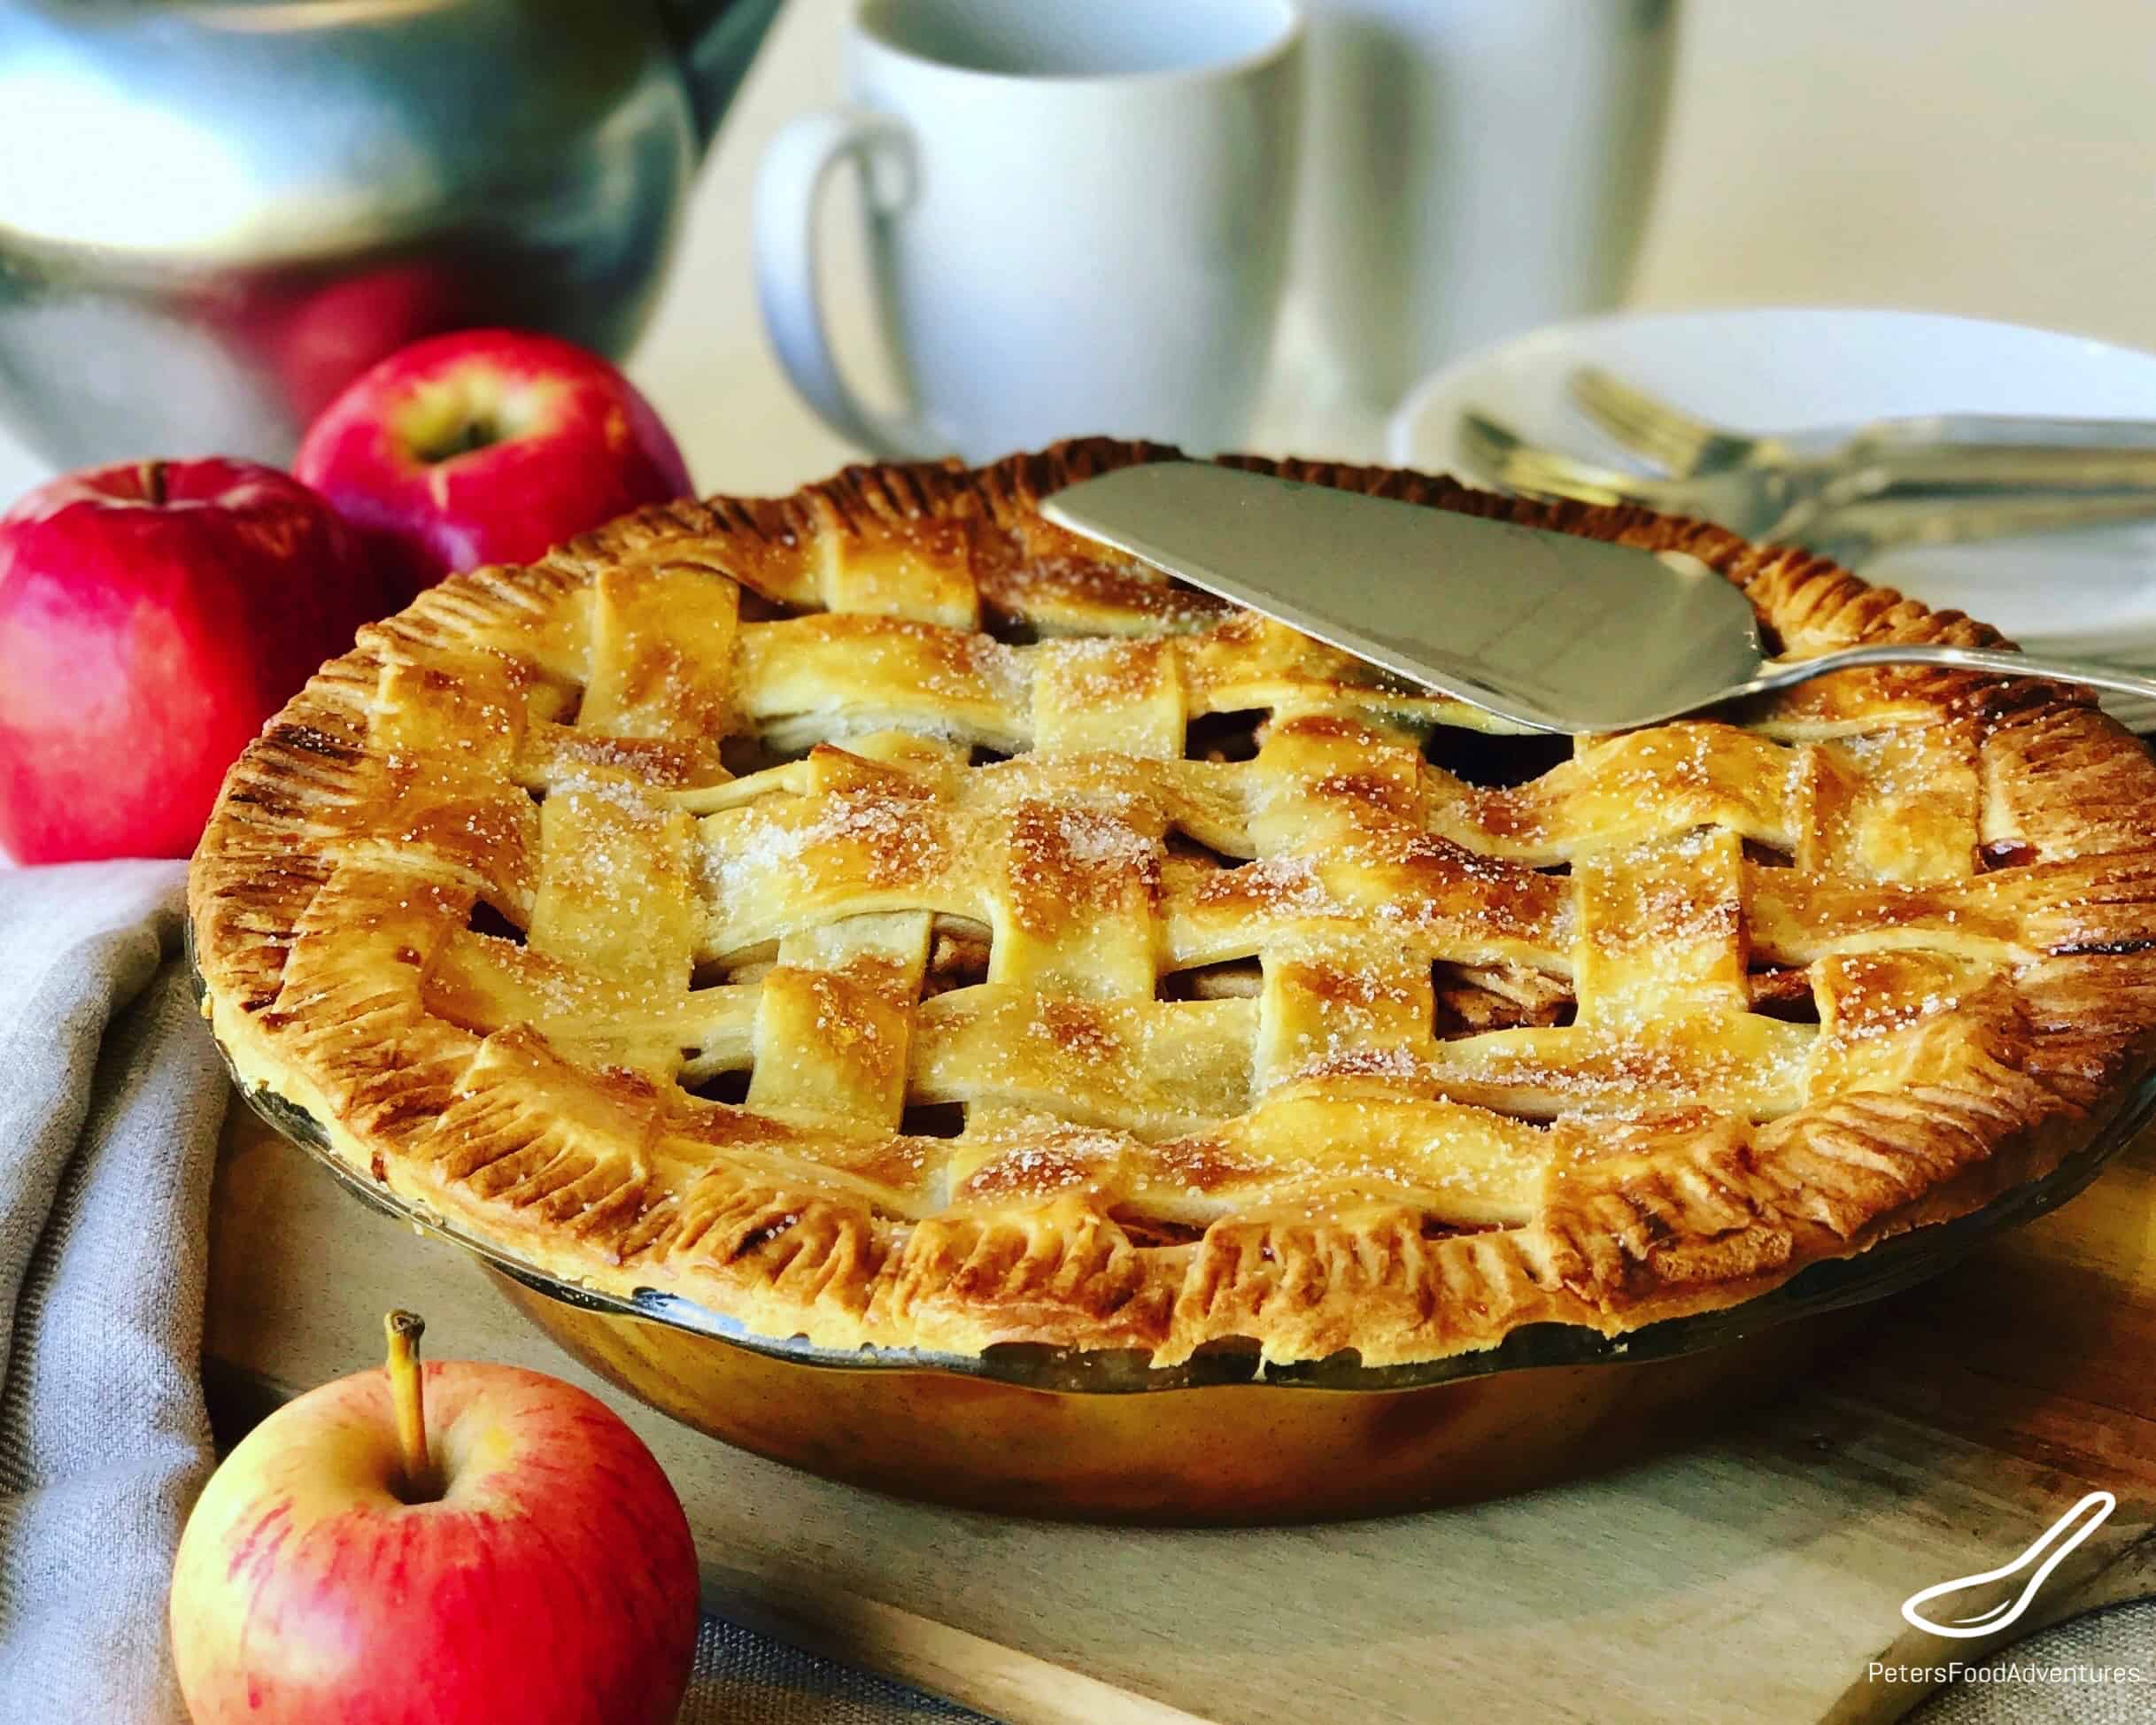 This Classic Apple Pie recipe is a family favorite! As American as Apple Pie, made with fresh apples, brown sugar, cinnamon with a shortcrust lattice pastry. This will be the only apple pie recipe you'll need!